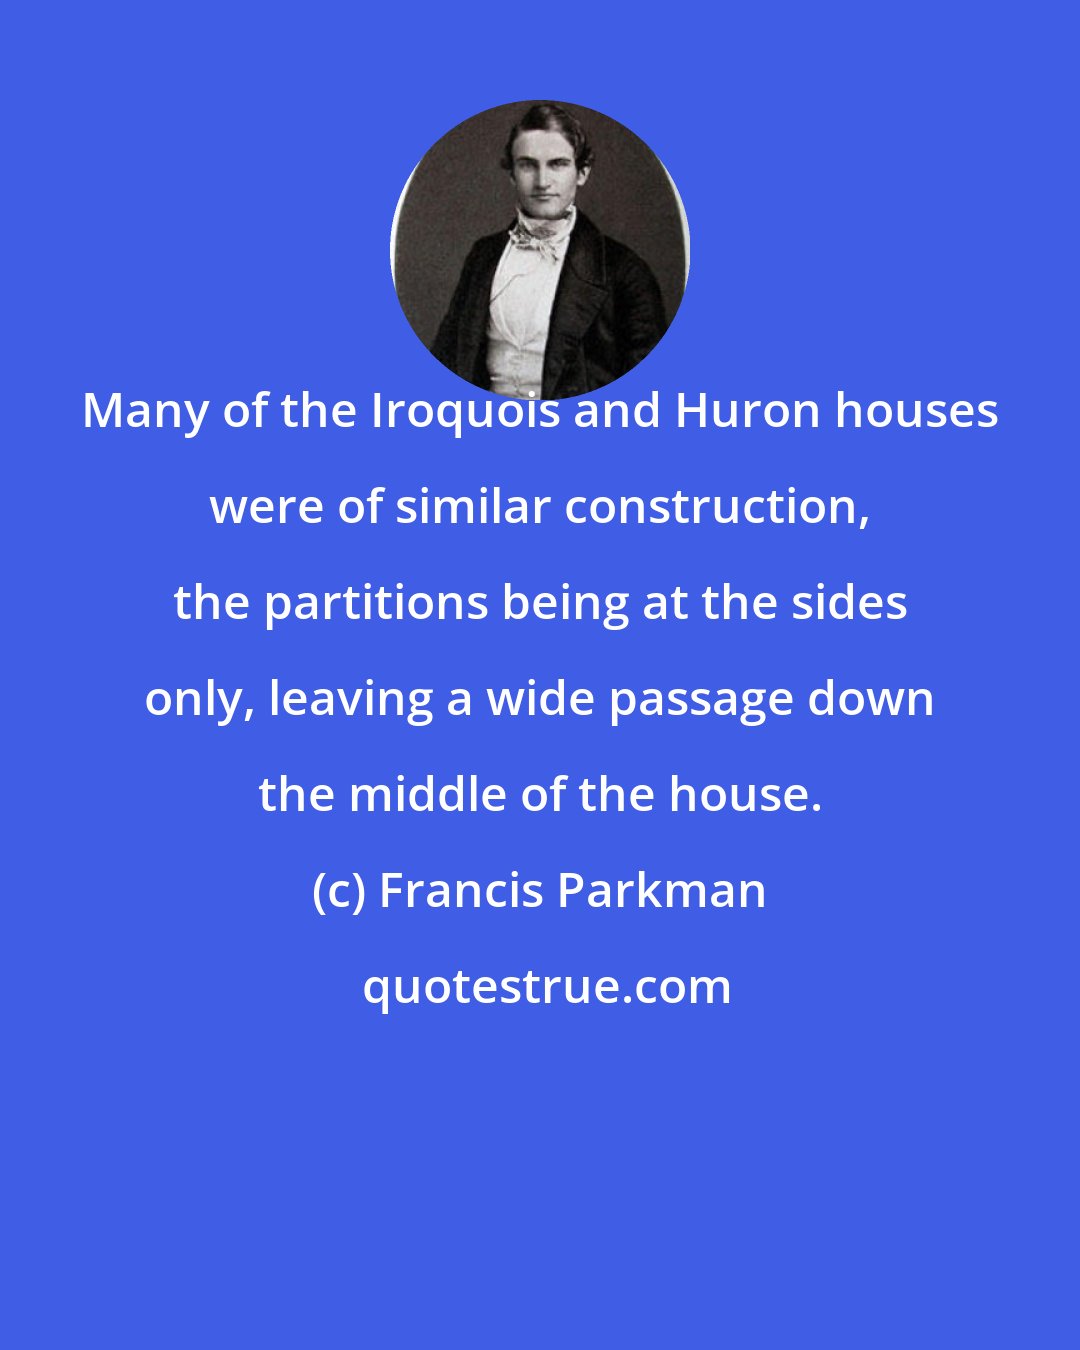 Francis Parkman: Many of the Iroquois and Huron houses were of similar construction, the partitions being at the sides only, leaving a wide passage down the middle of the house.